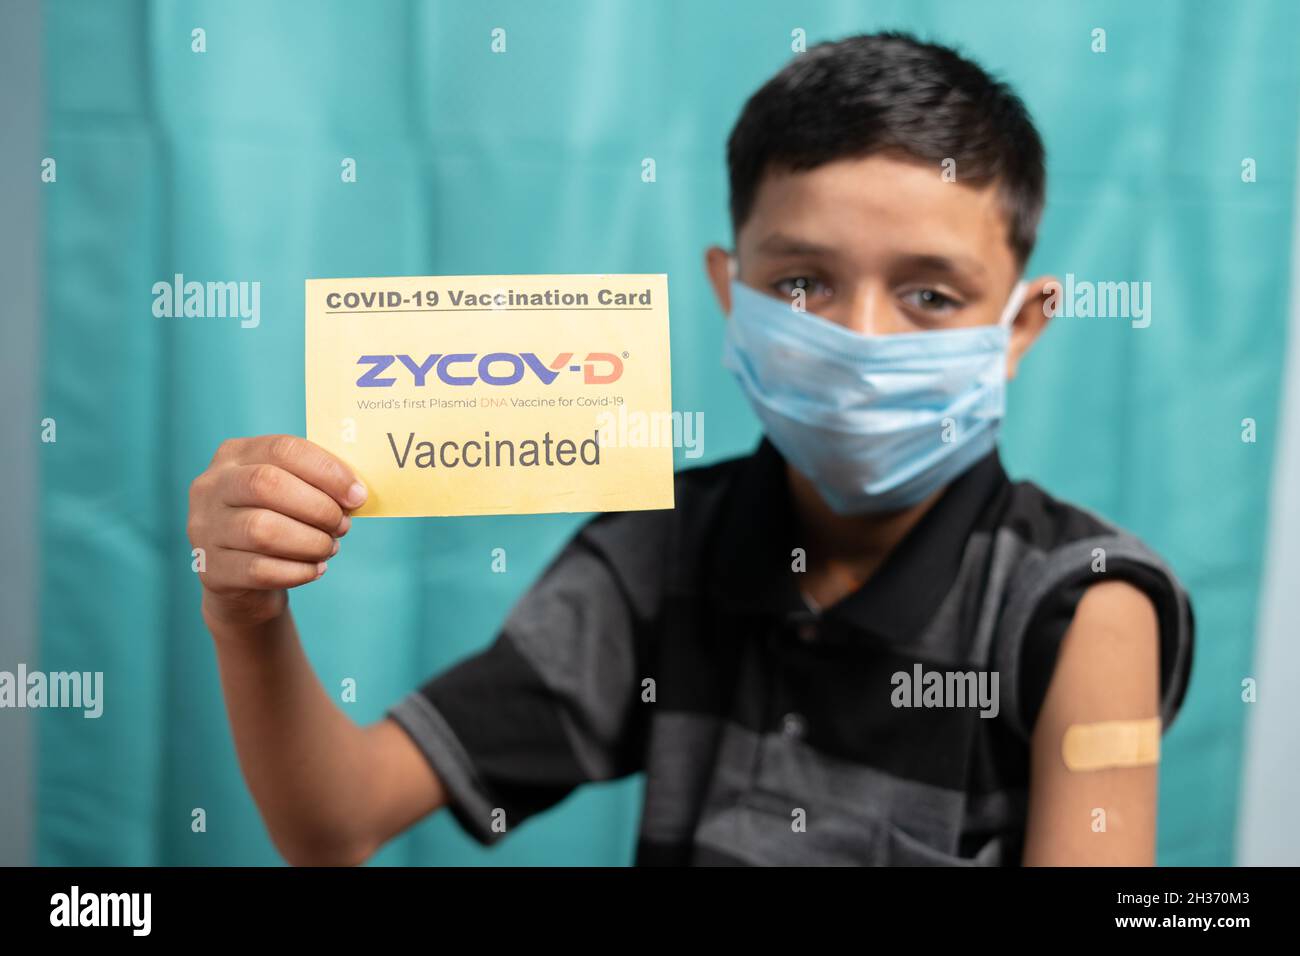 Maski, India - October 26, 2021 : Young kid with medical face mask showing ZYCOV-D Covid-19 or coronavirus Vaccinated report card. Stock Photo